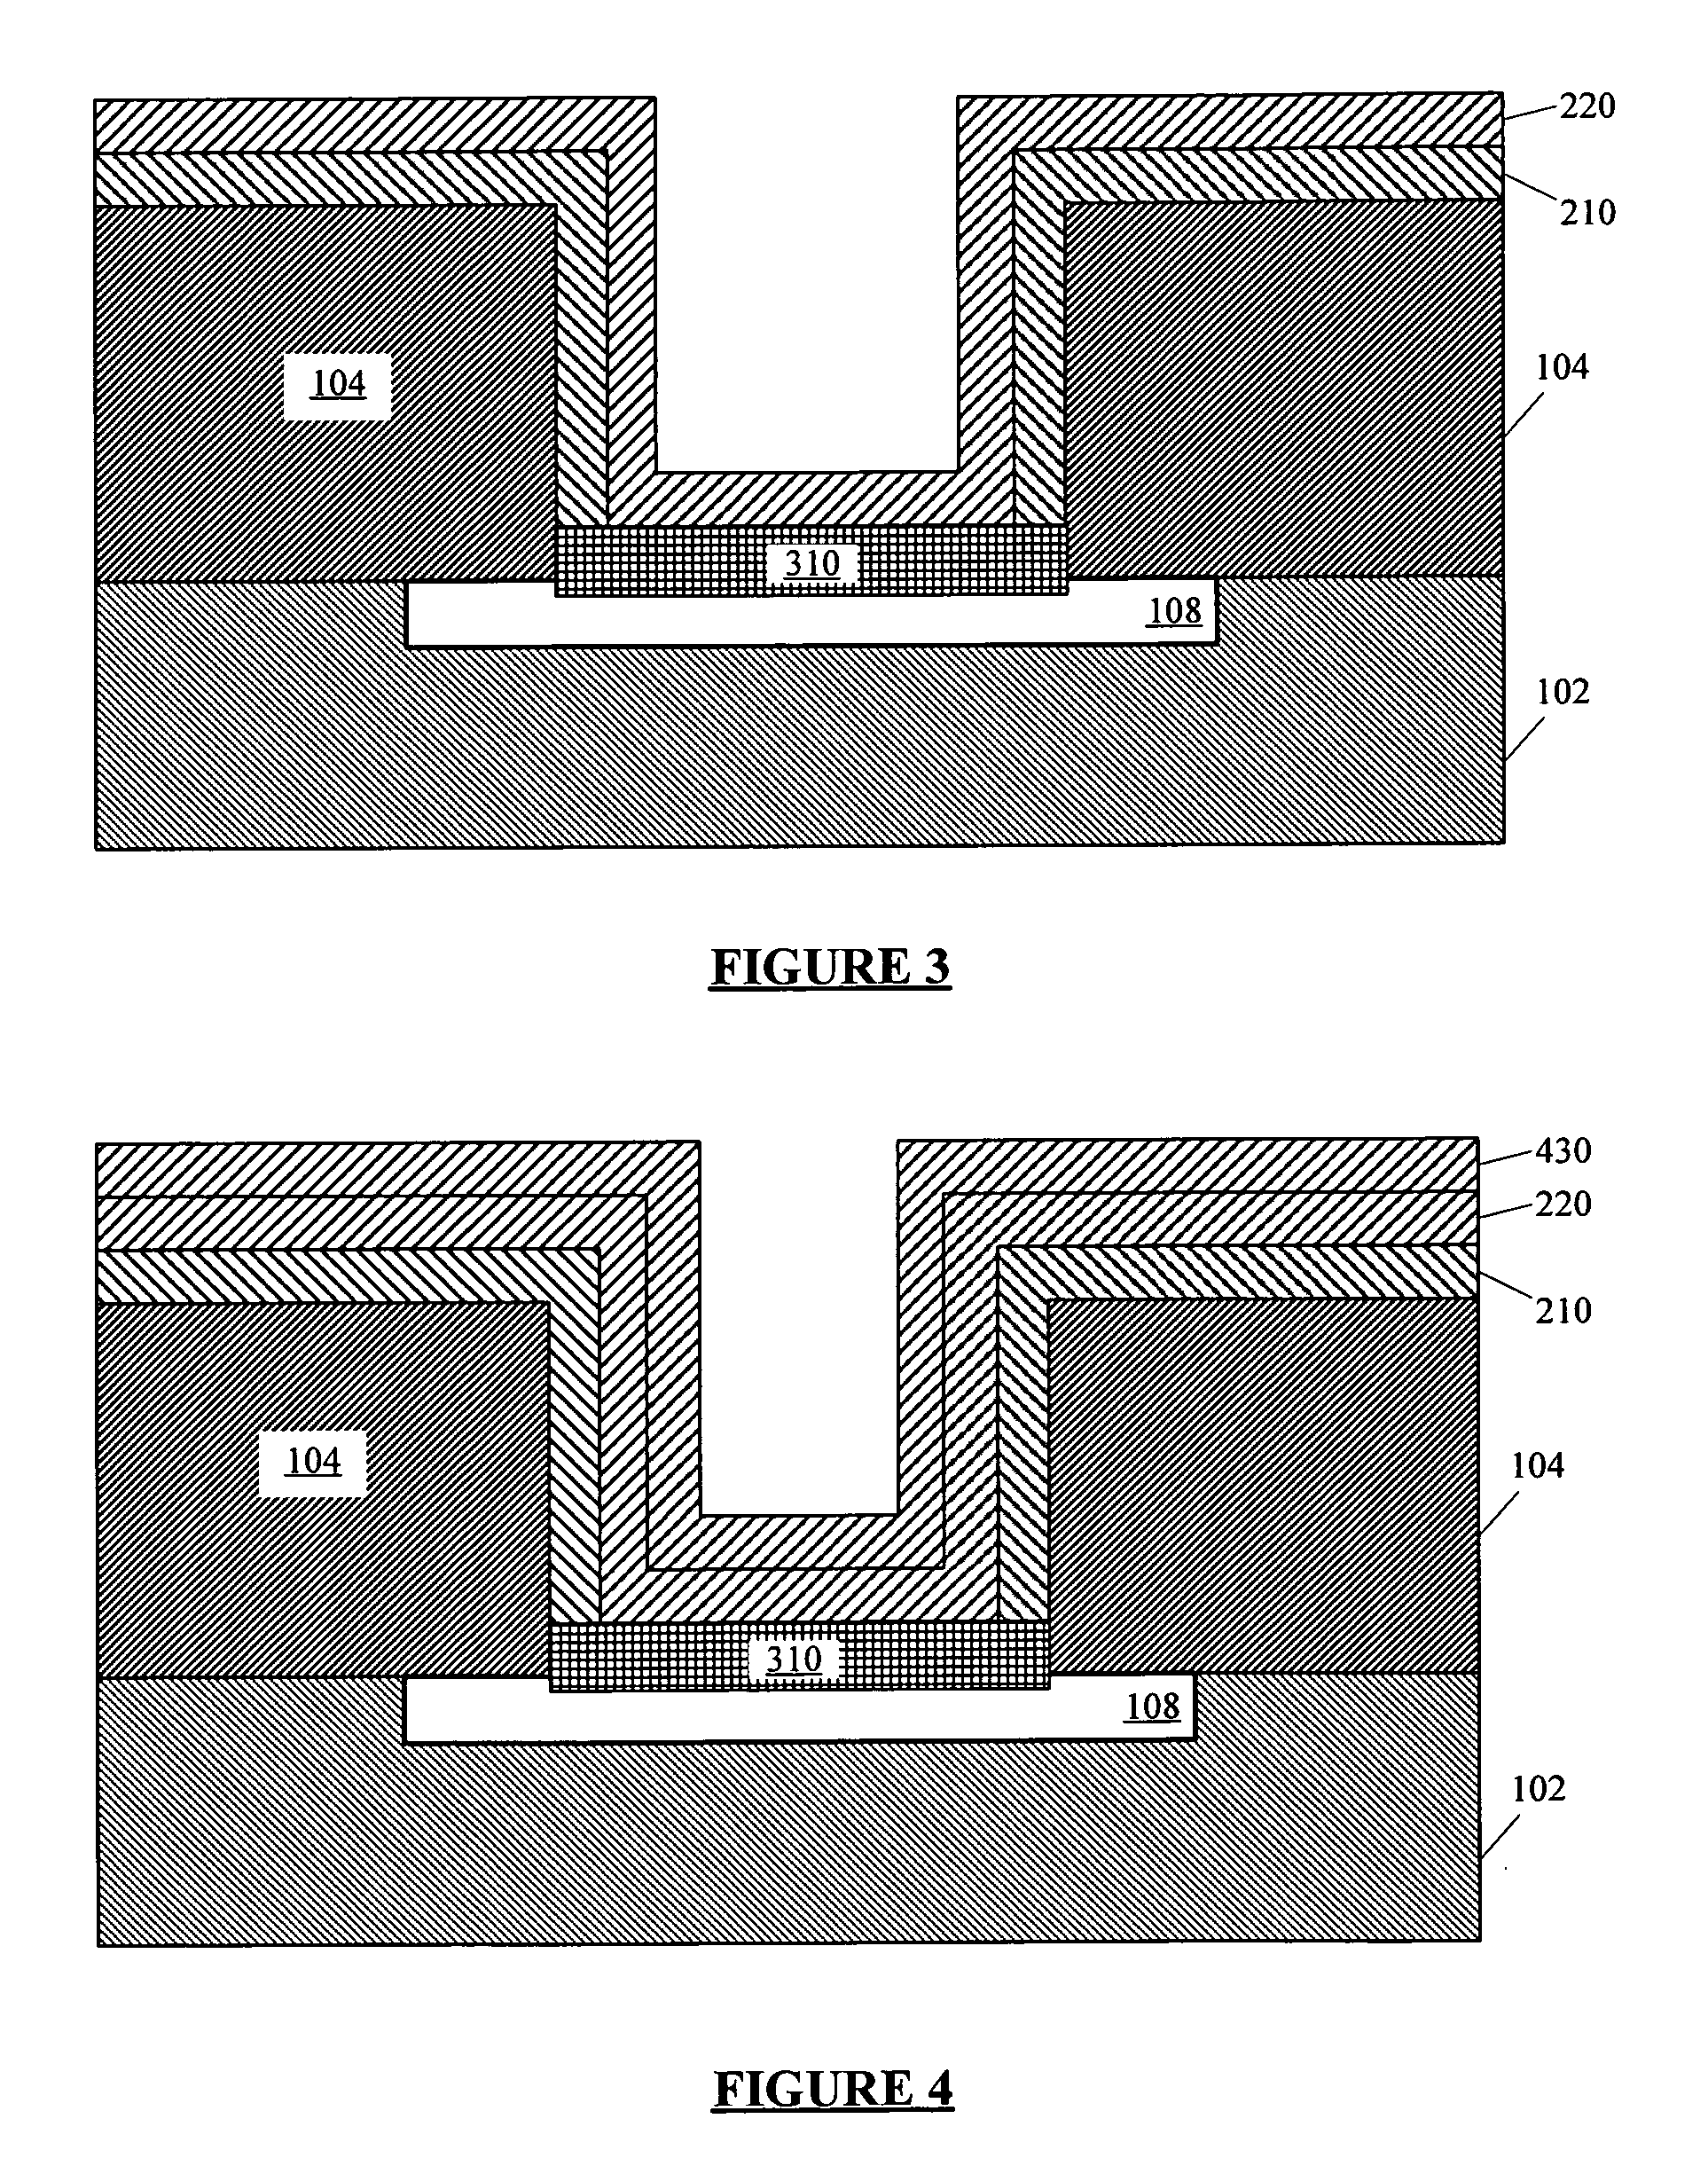 Submicron contact fill using a CVD TiN barrier and high temperature PVD aluminum alloy deposition